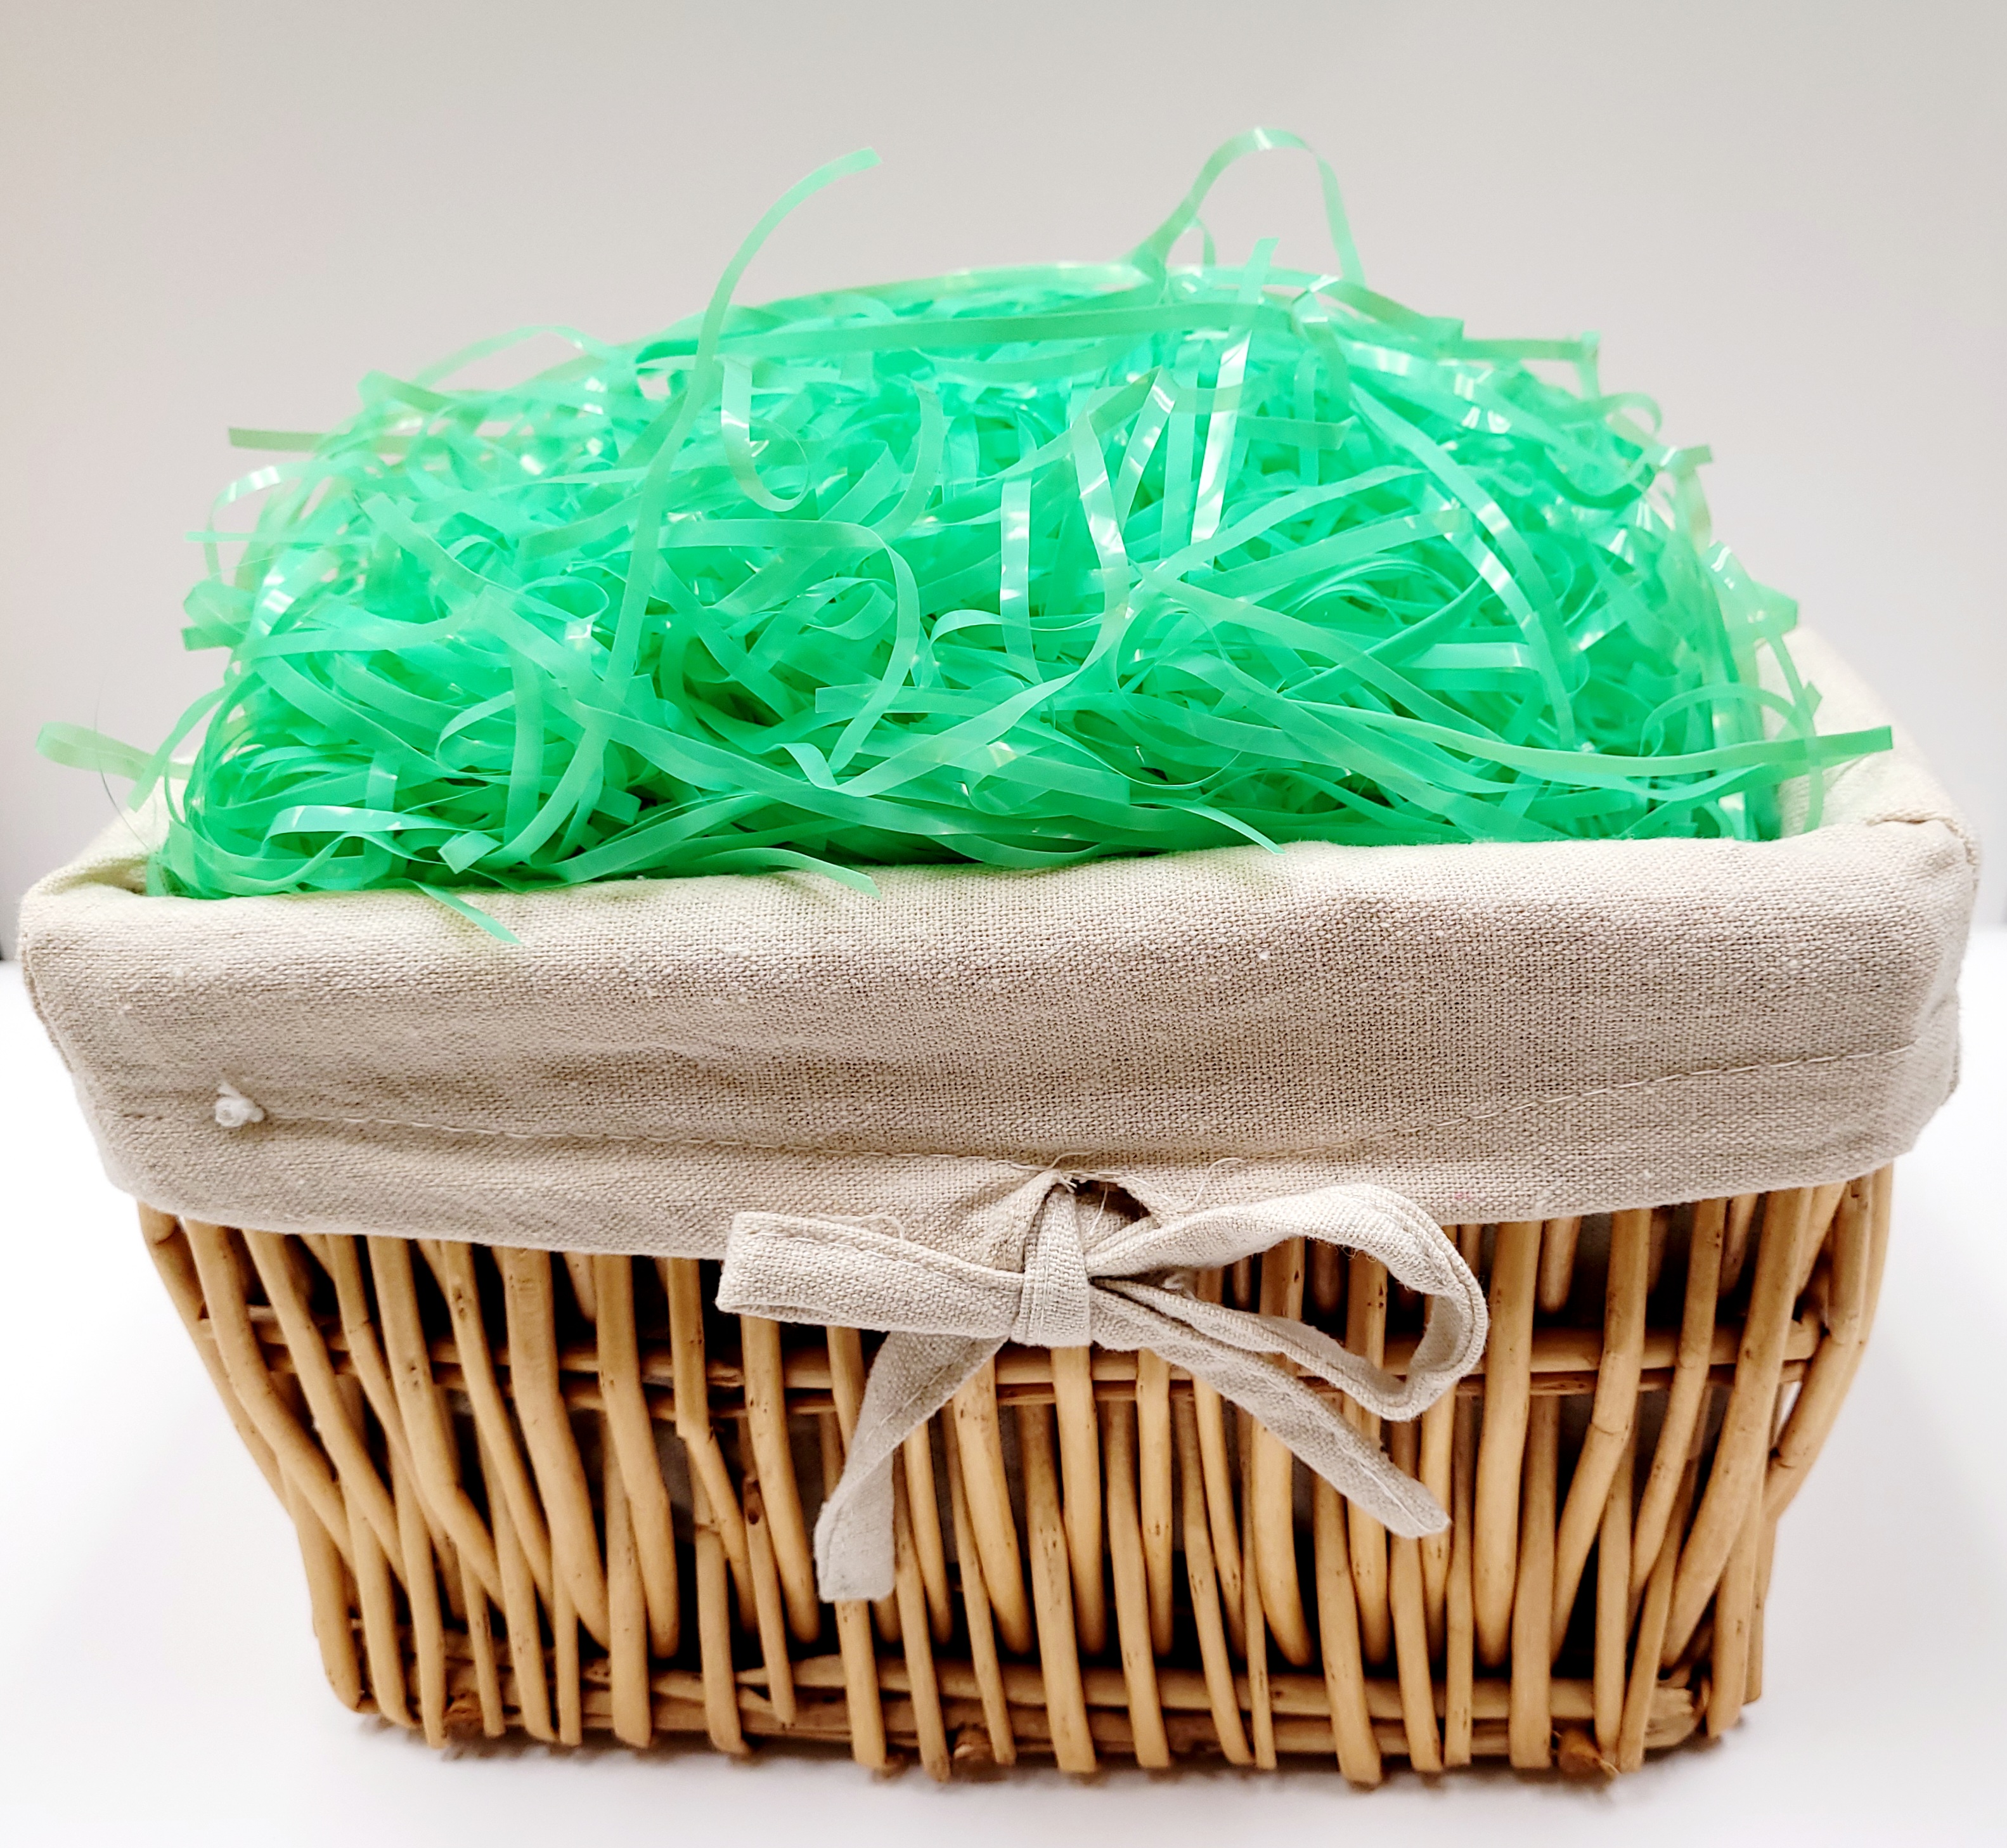 PEEPS Marshmallow Scented Plastic Easter Grass Green, 3oz 